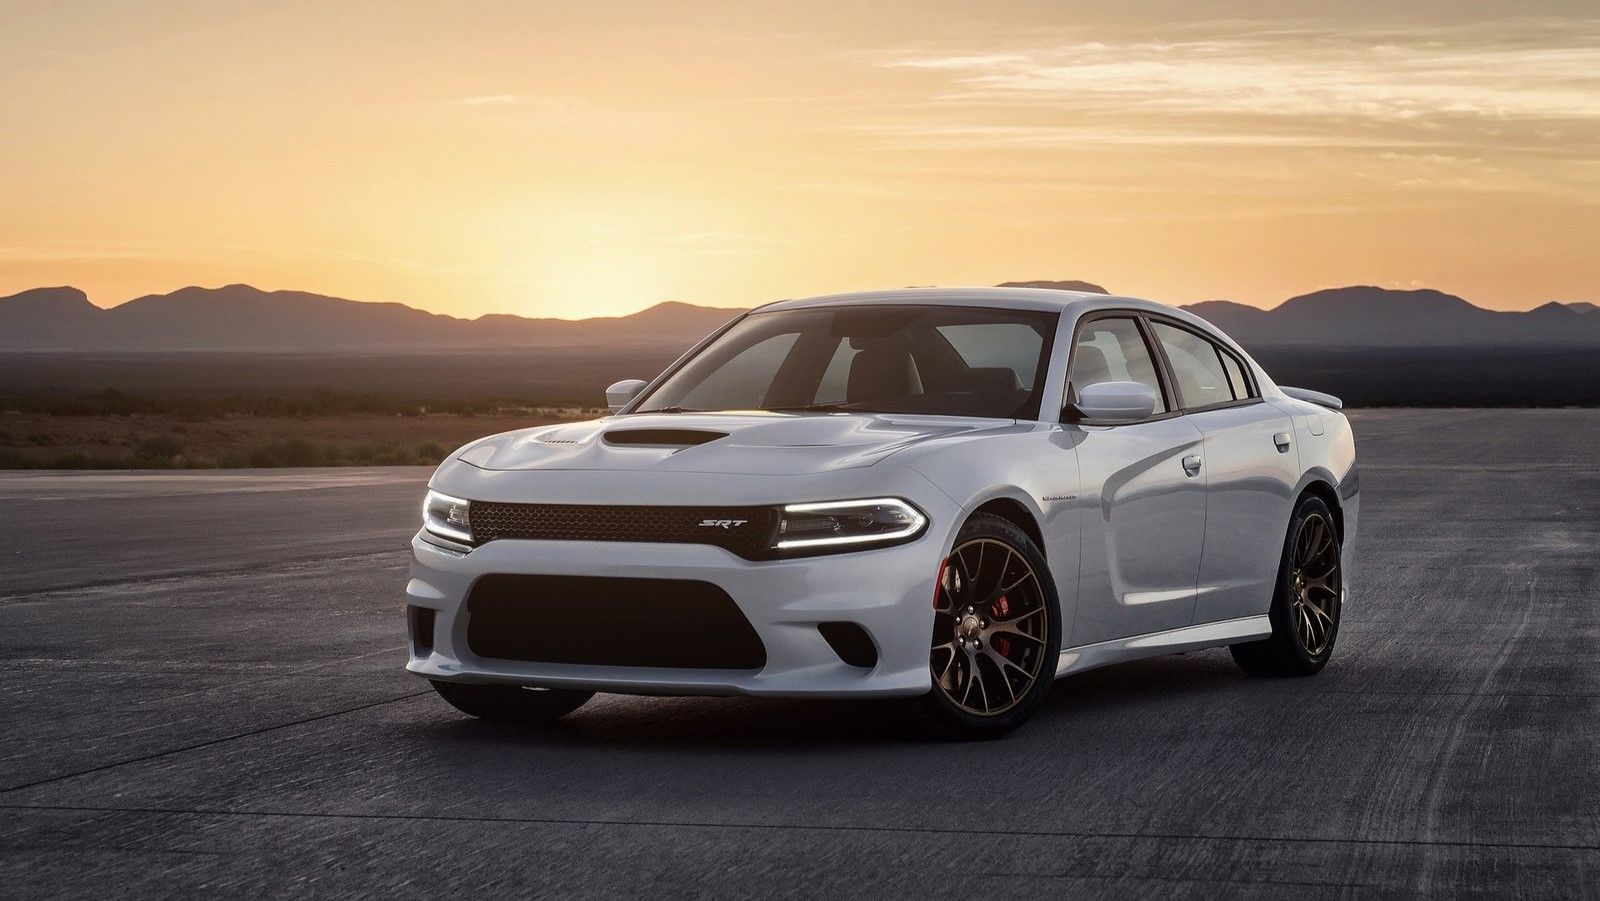 2015 Dodge Charger SRT Hellcat parked on a runway.